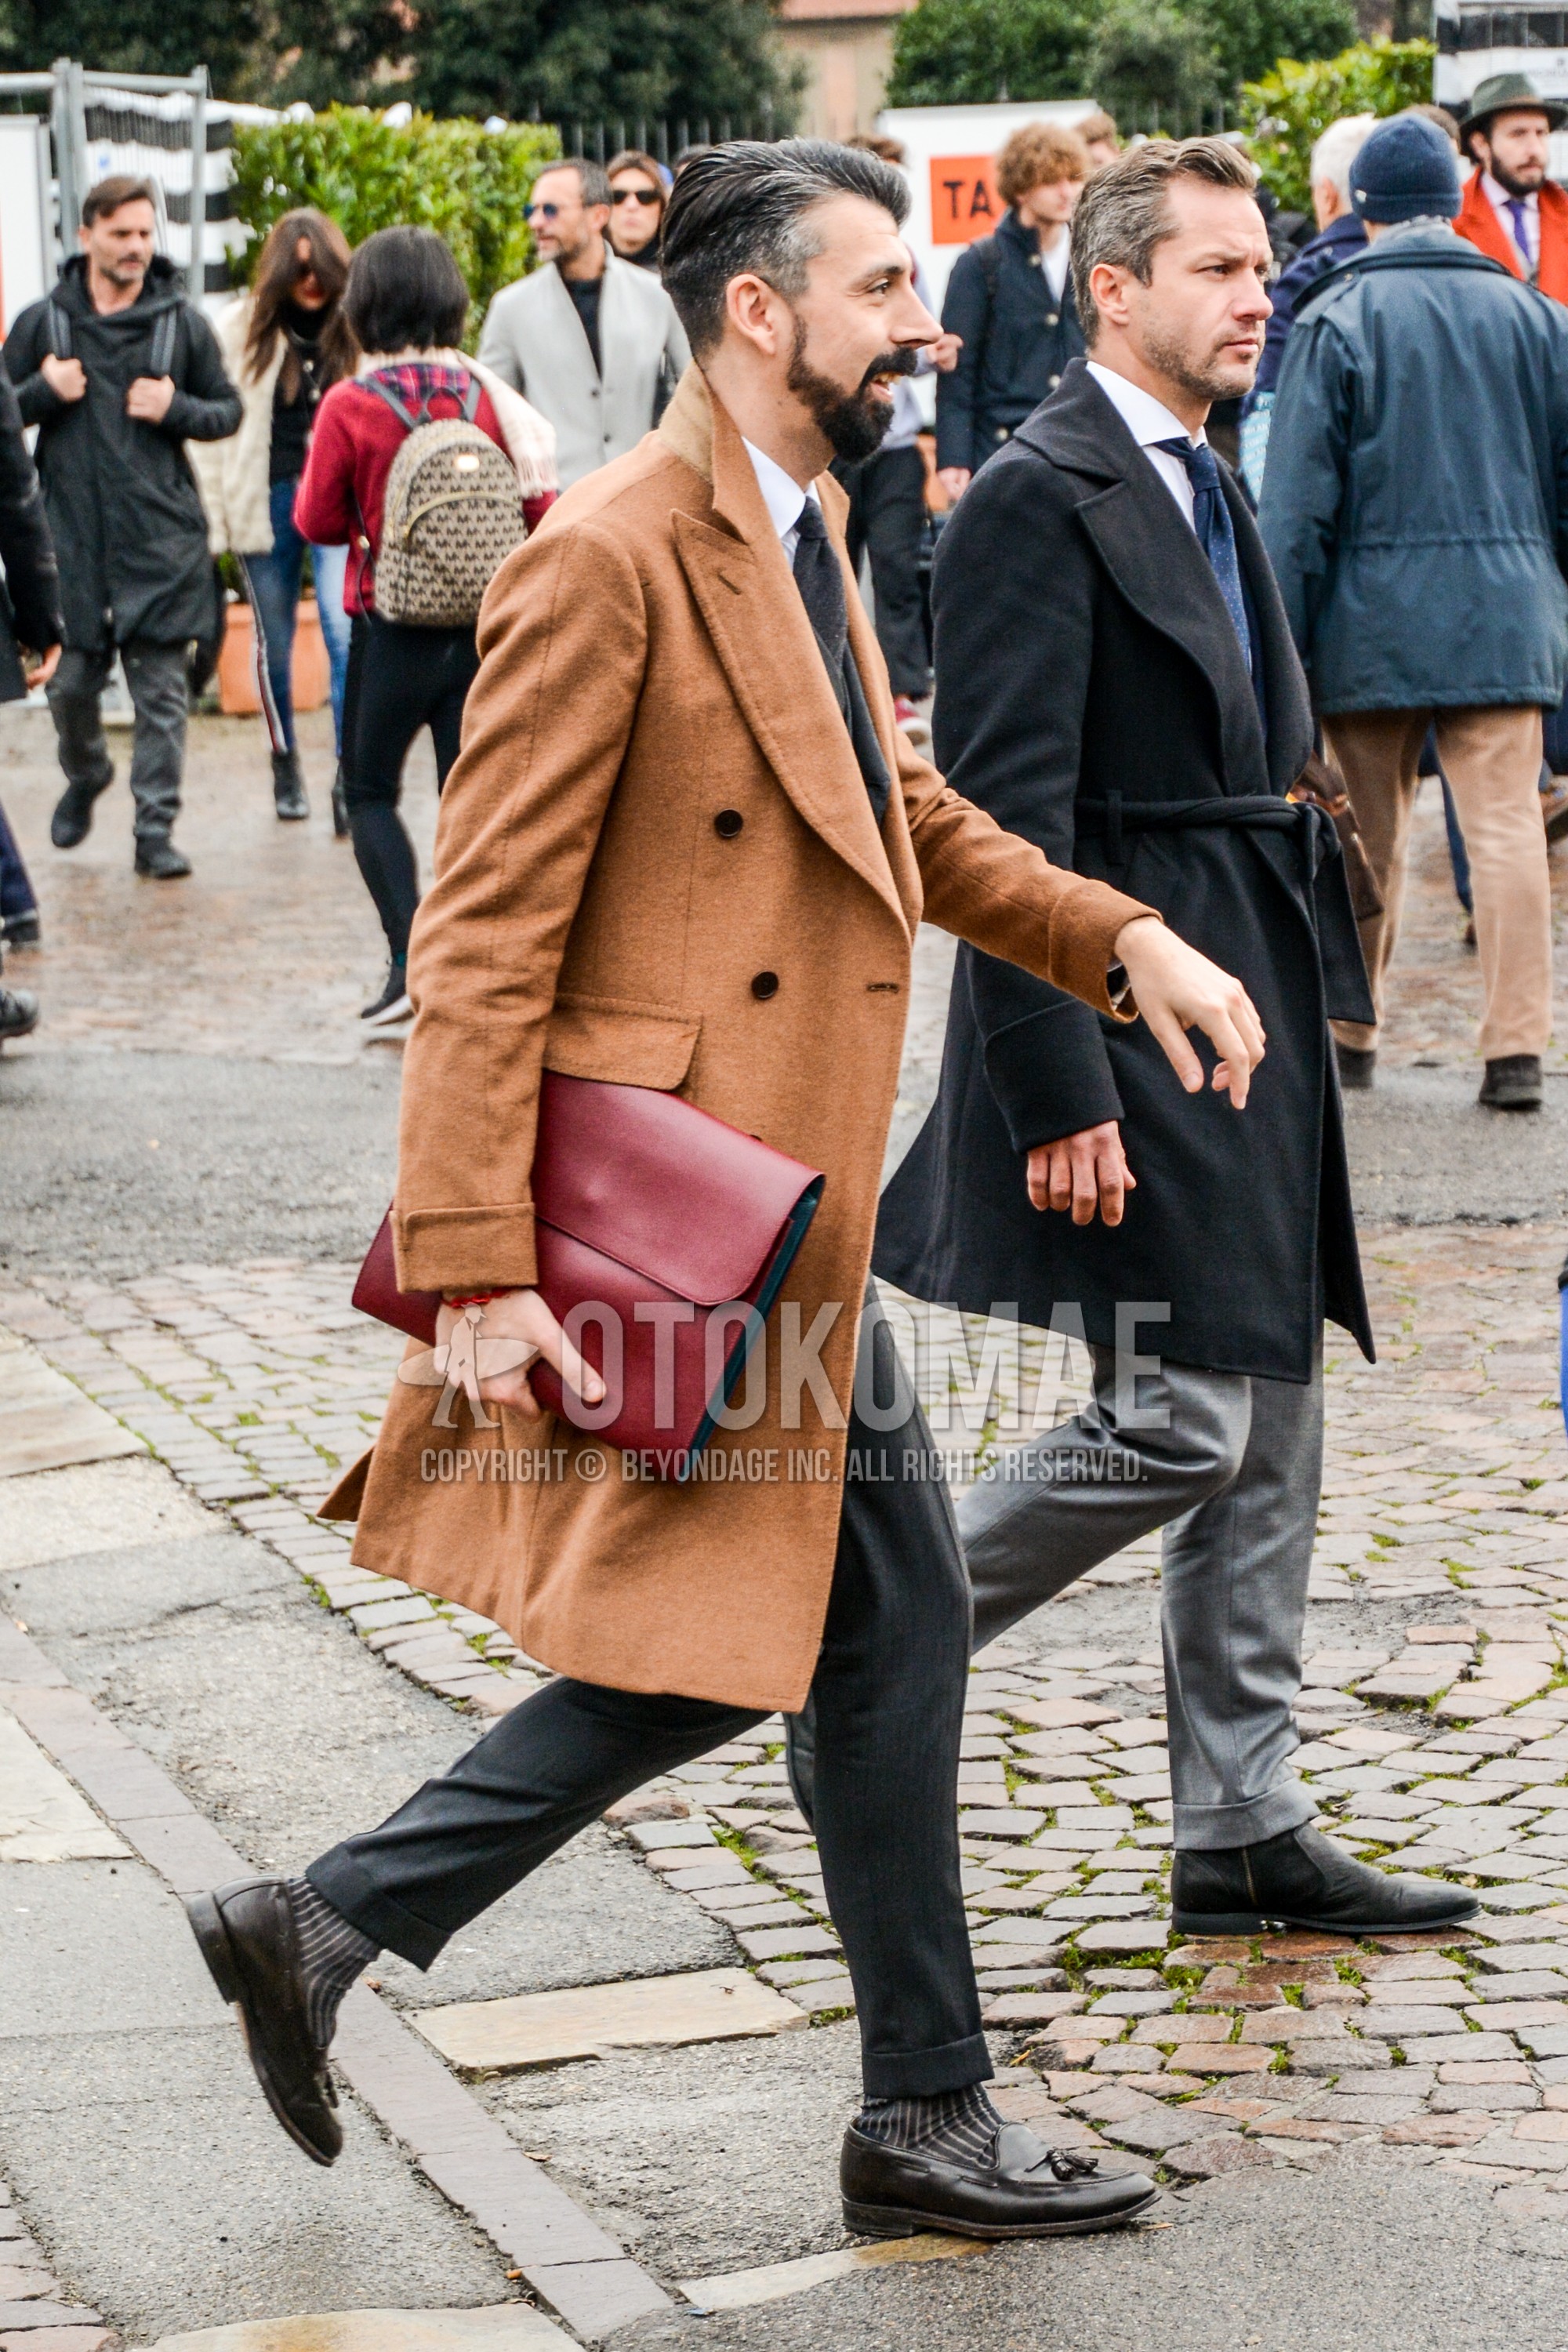 Men's autumn winter outfit with beige plain chester coat, brown stripes socks, brown tassel loafers leather shoes, red plain clutch bag/second bag/drawstring bag, gray plain suit.